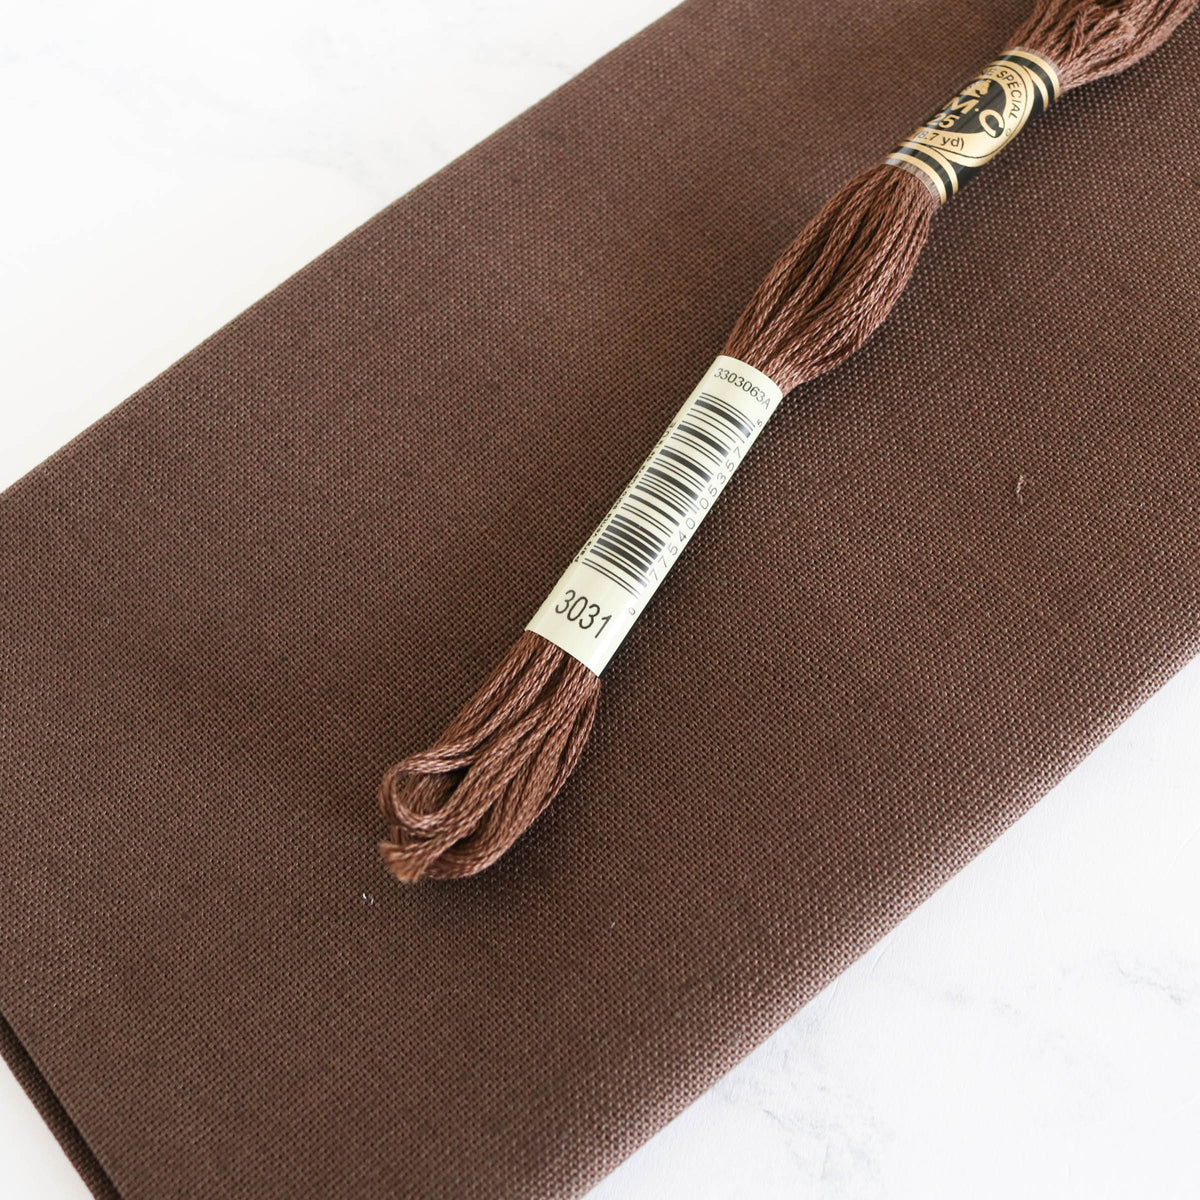 Cotton Hand Embroidery Fabric - Brown